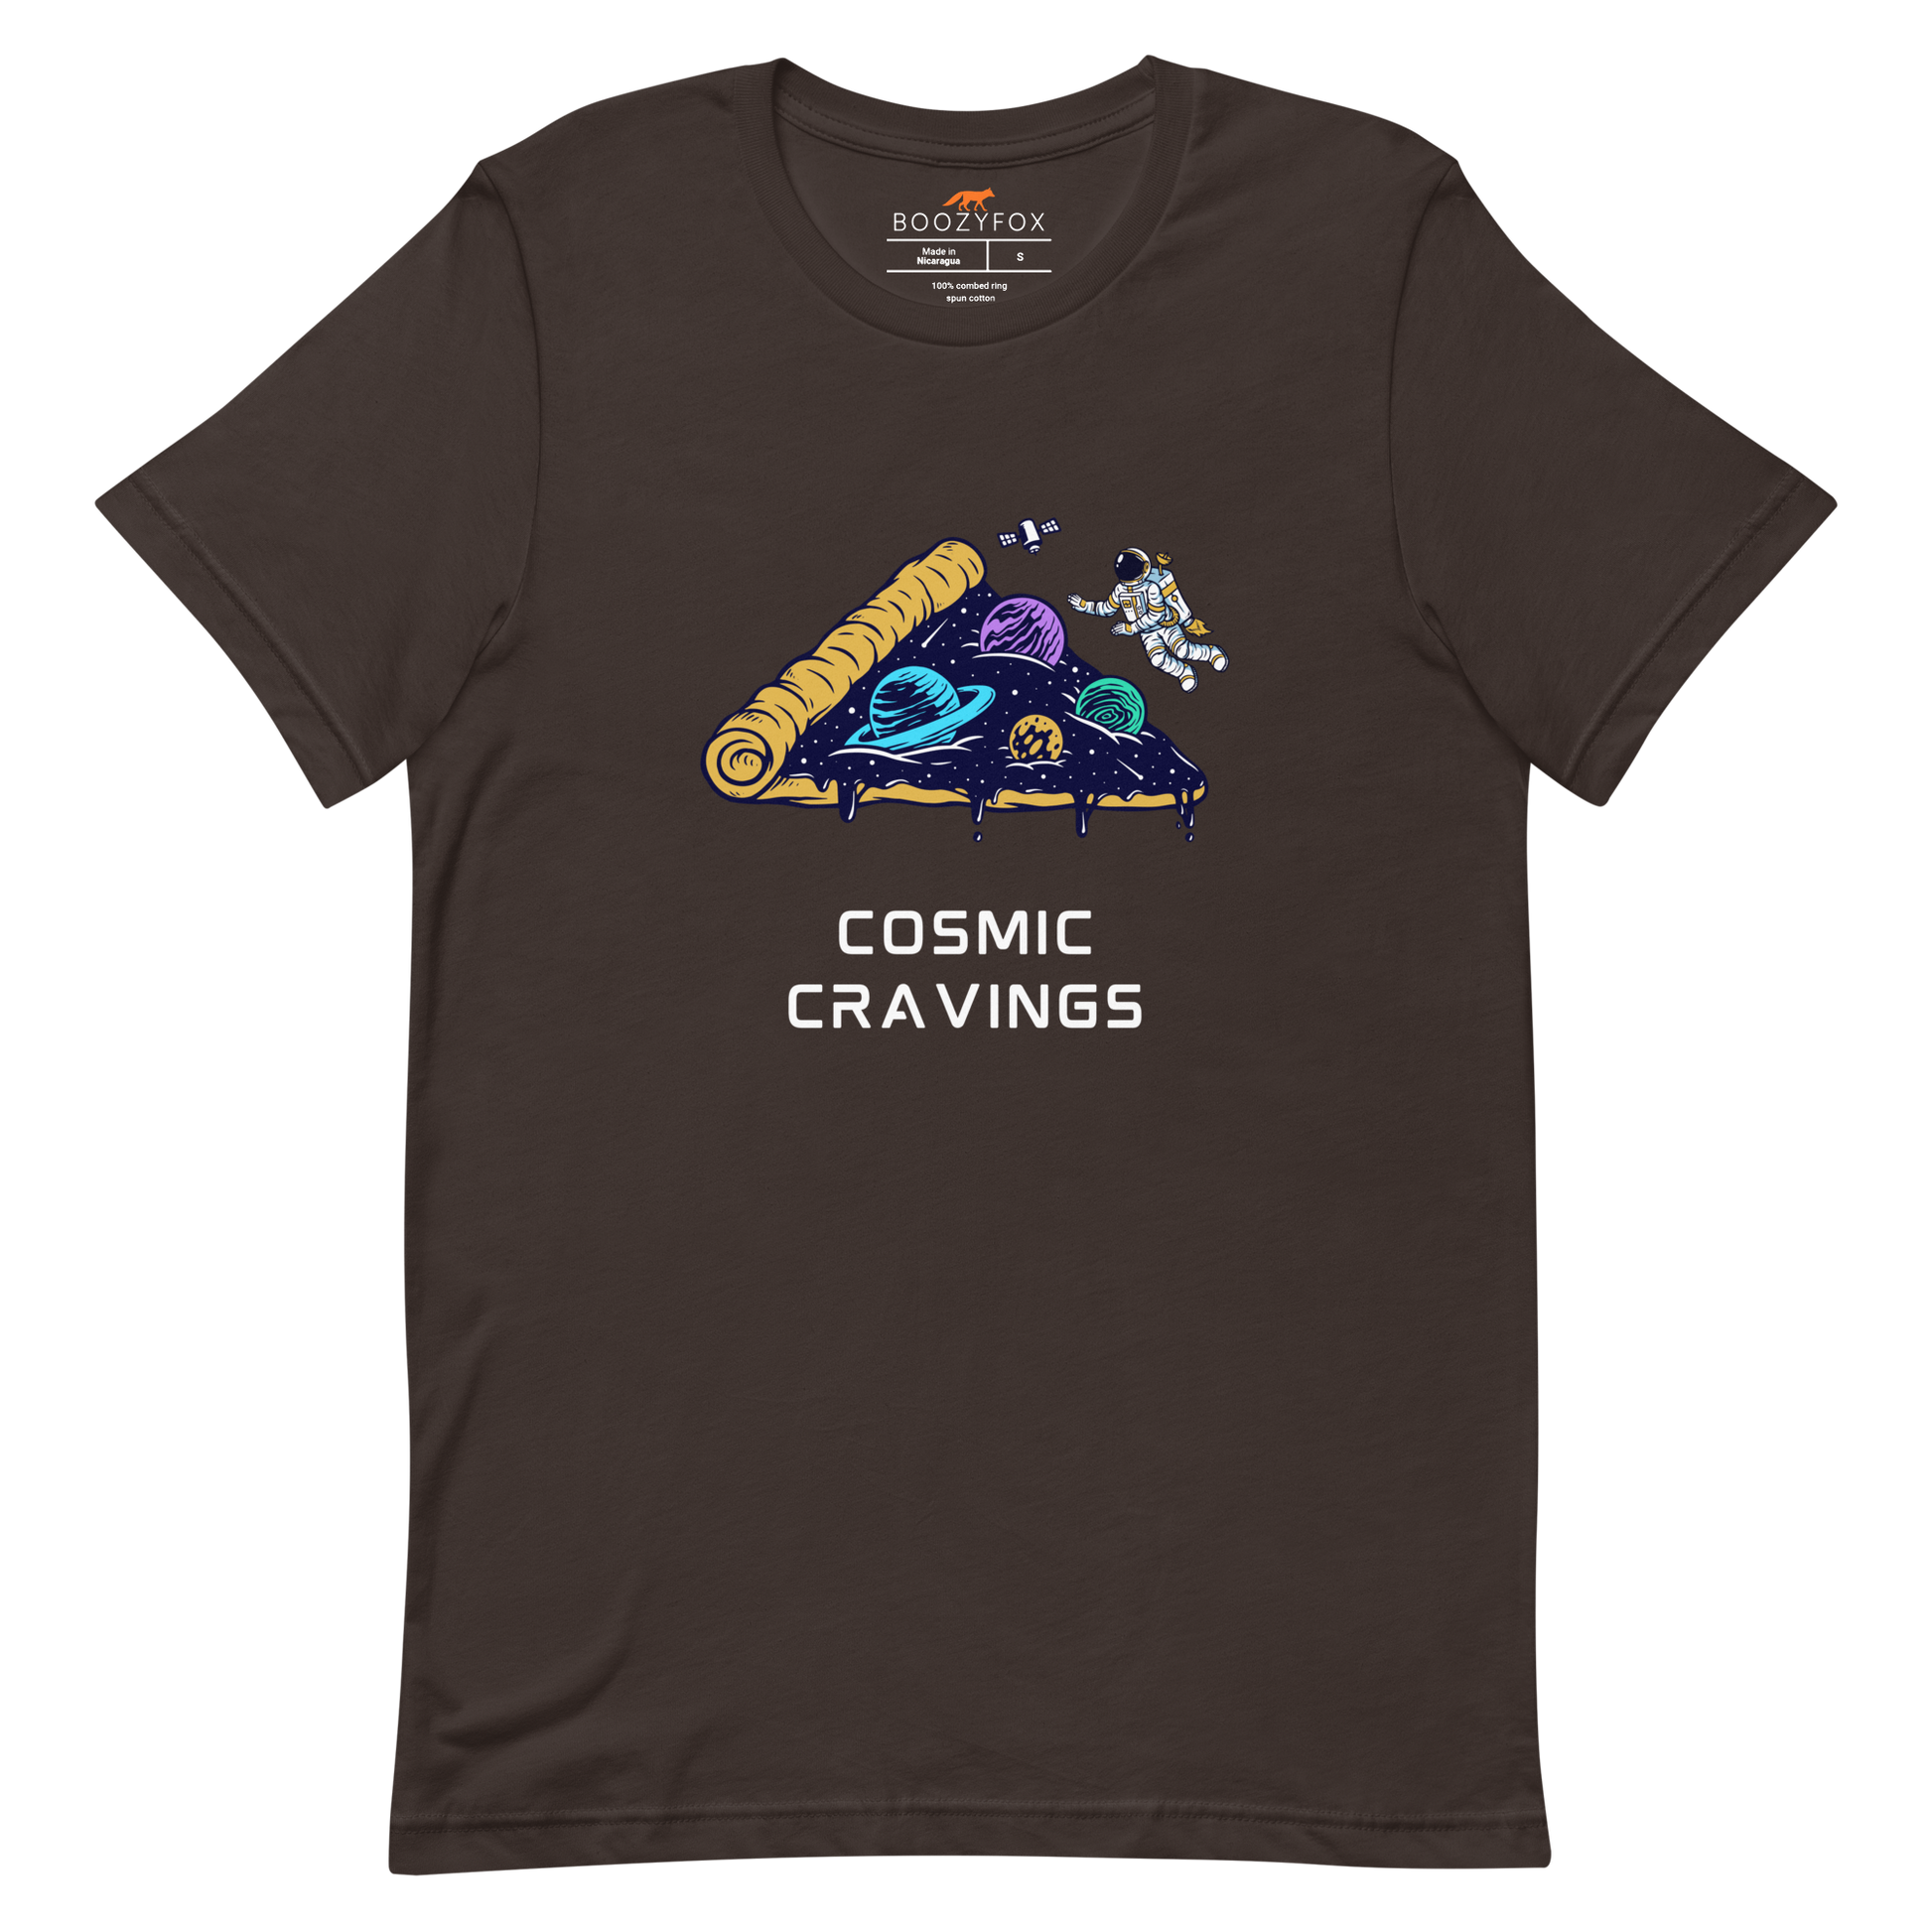 Brown Premium Cosmic Cravings Tee featuring an Astronaut Exploring a Pizza Universe graphic on the chest - Funny Graphic Space Tees - Boozy Fox